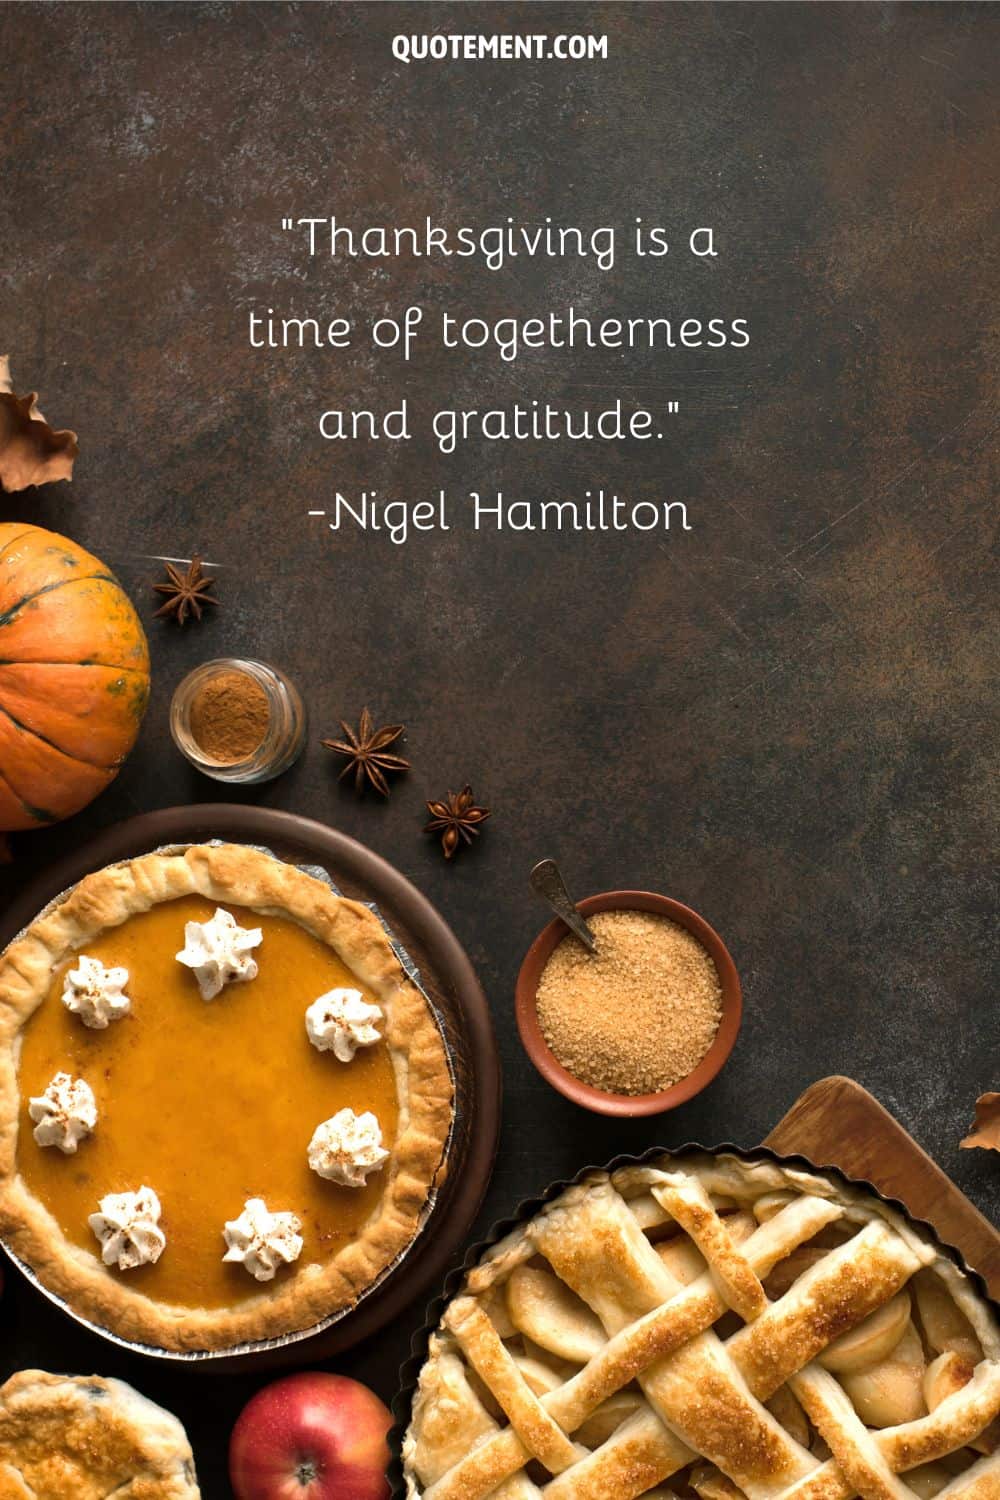 apple and pumpkin pies surrounded by spices representing a short quote about Thanksgiving